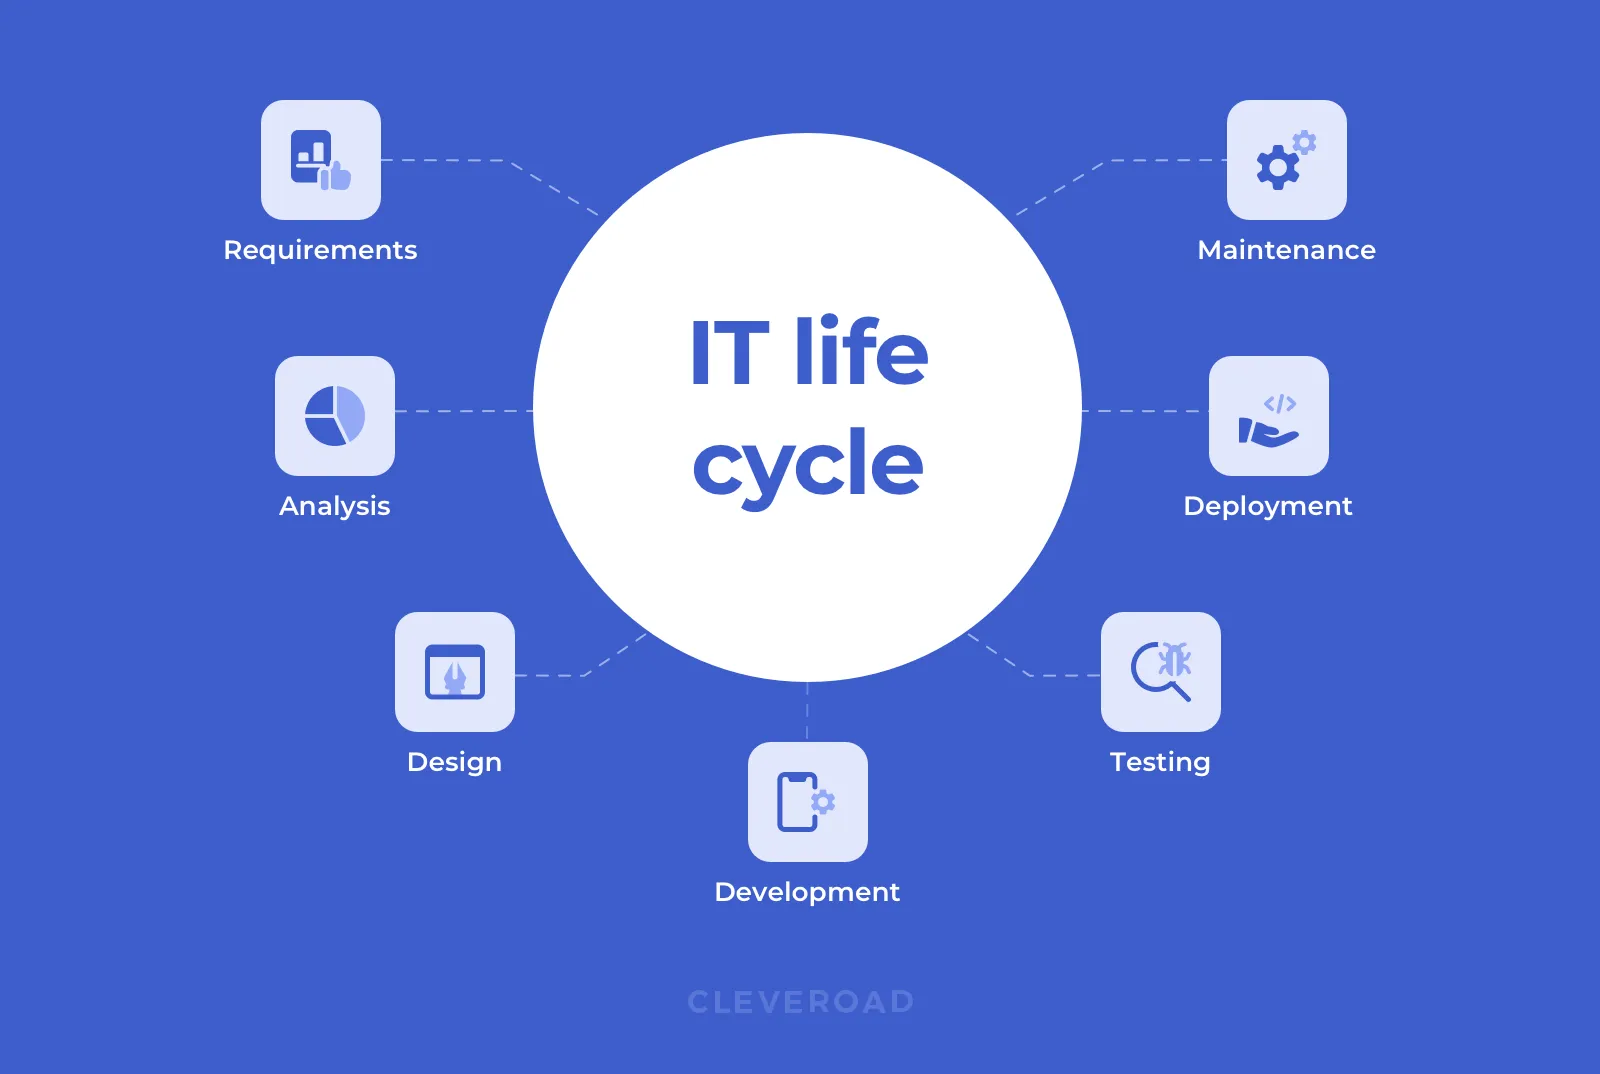 IT life cycle to follow